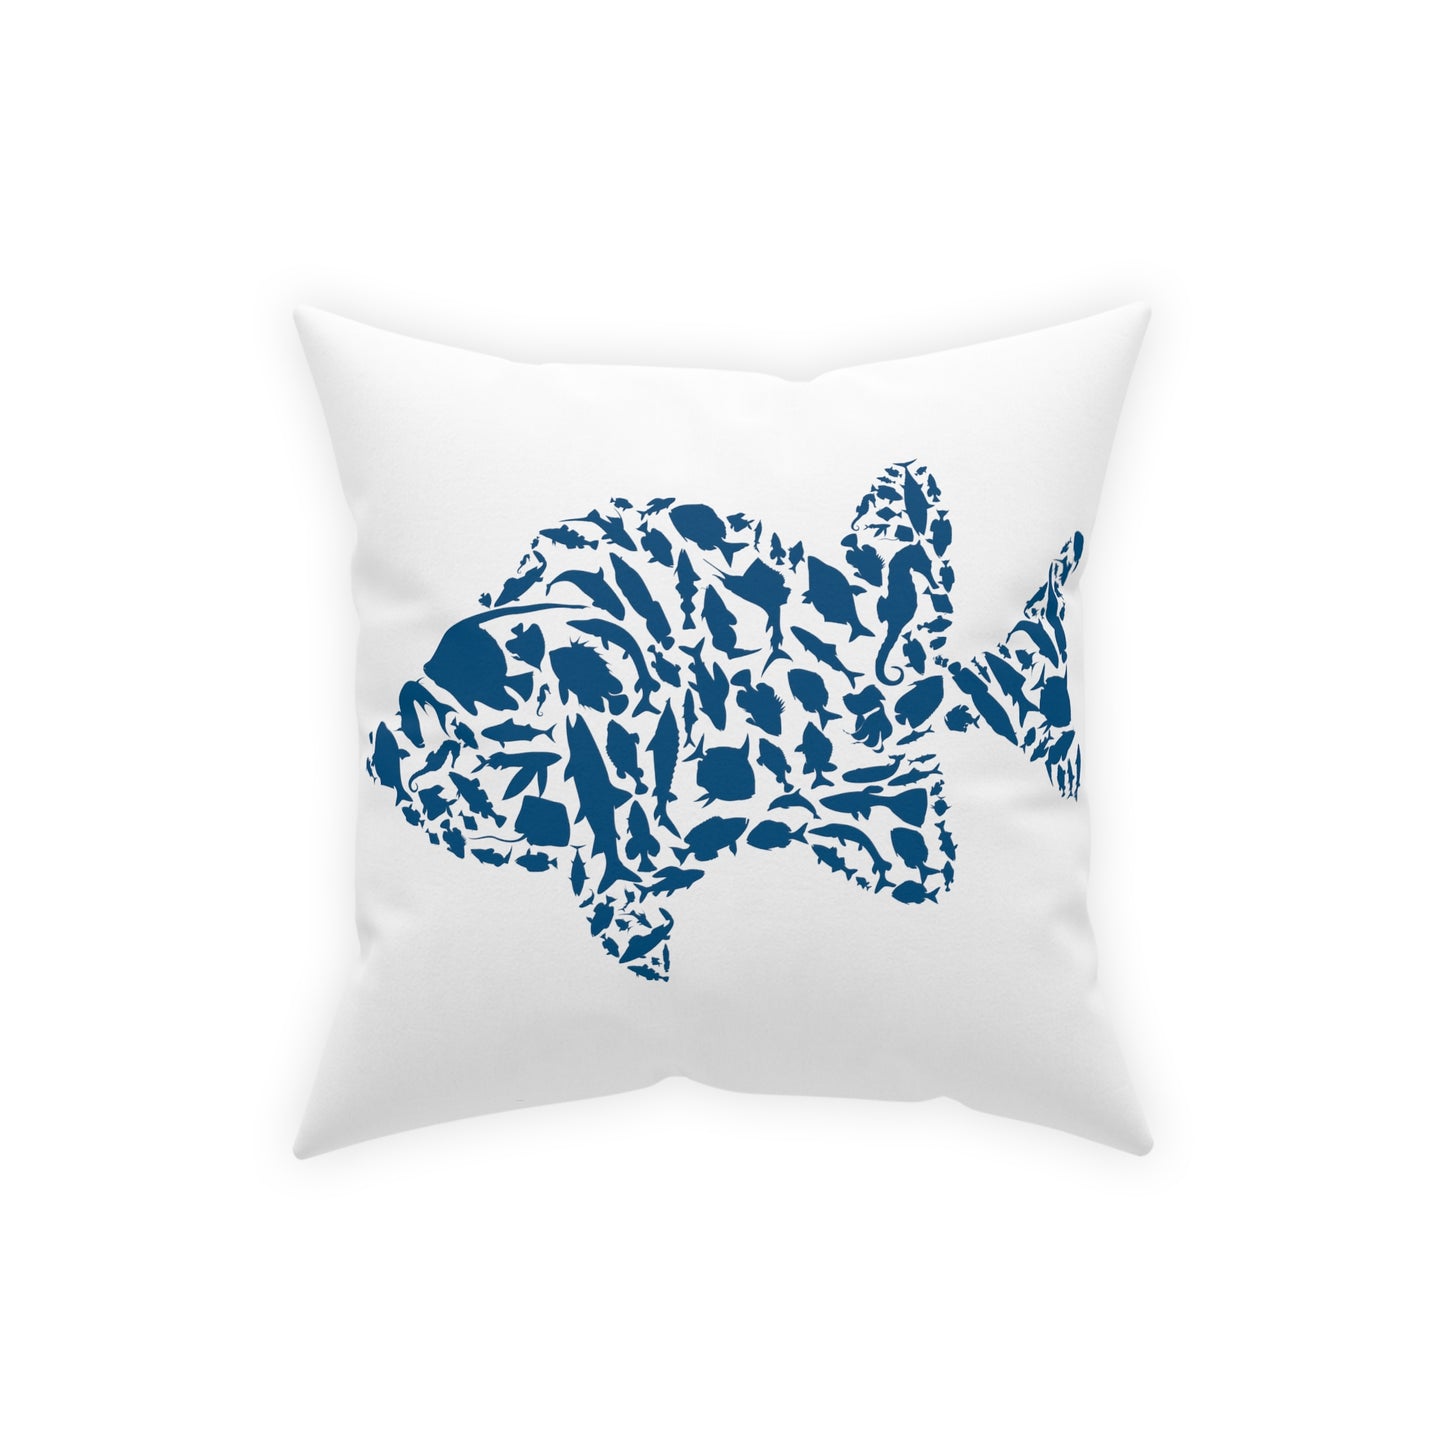 Fish Blue Pillow 16 x 16, Fishing Gifts,  Animal Lovers Gift, Coastal Home Decoration - Design Club Home